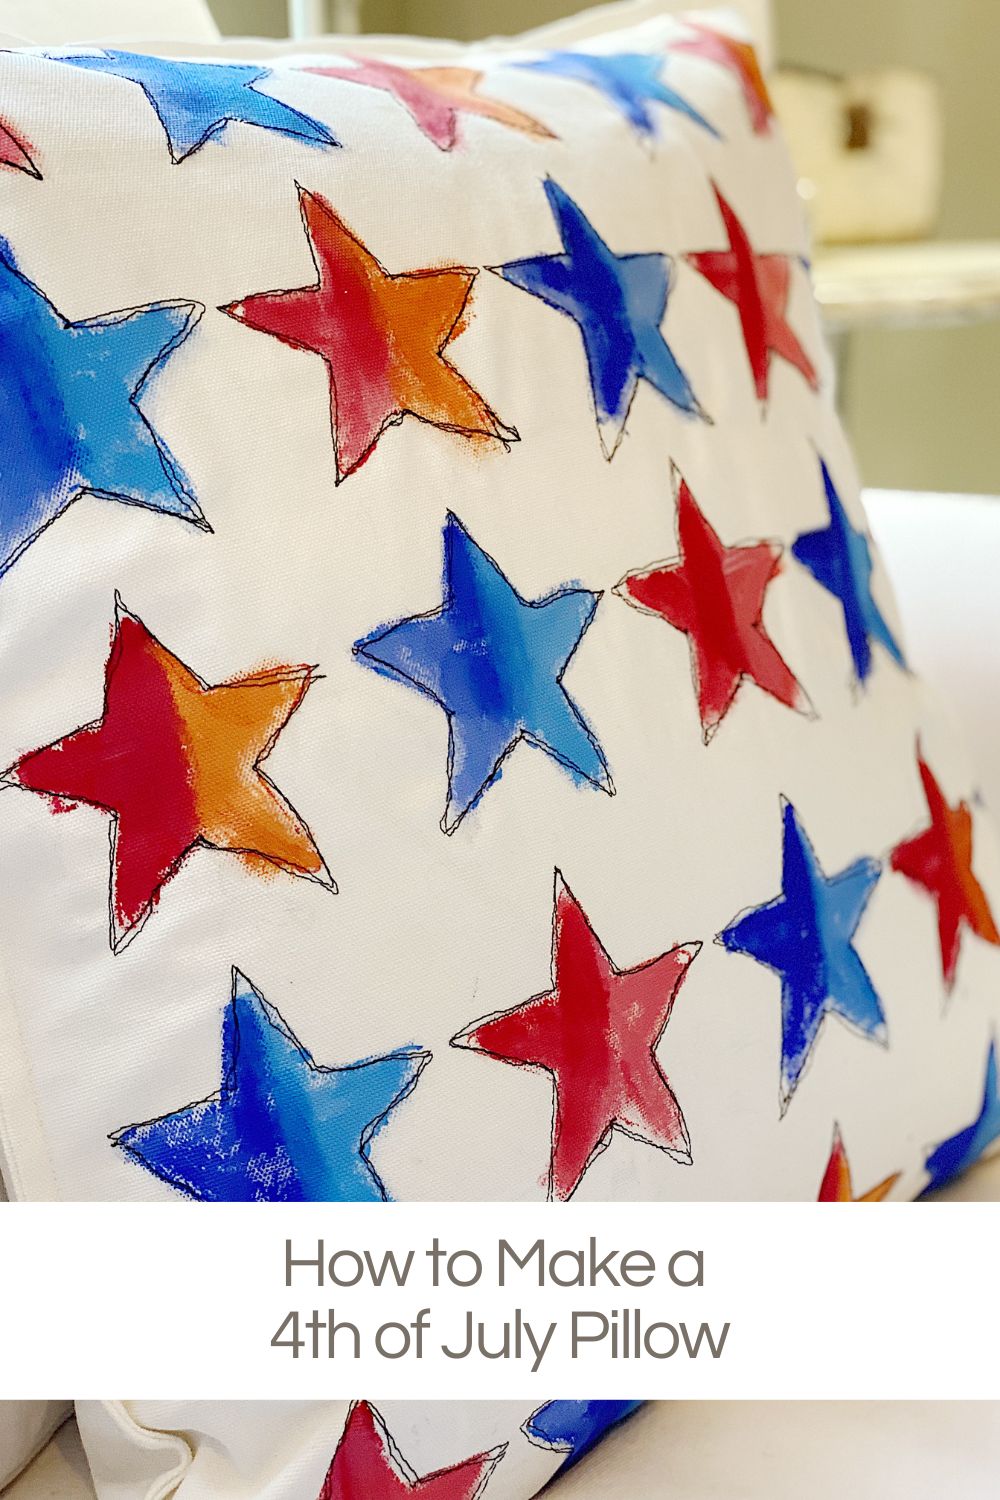 I just love the 4th of July and I needed more patriotic decorations for our home. So I made this pillow with stars and machine embroidery!